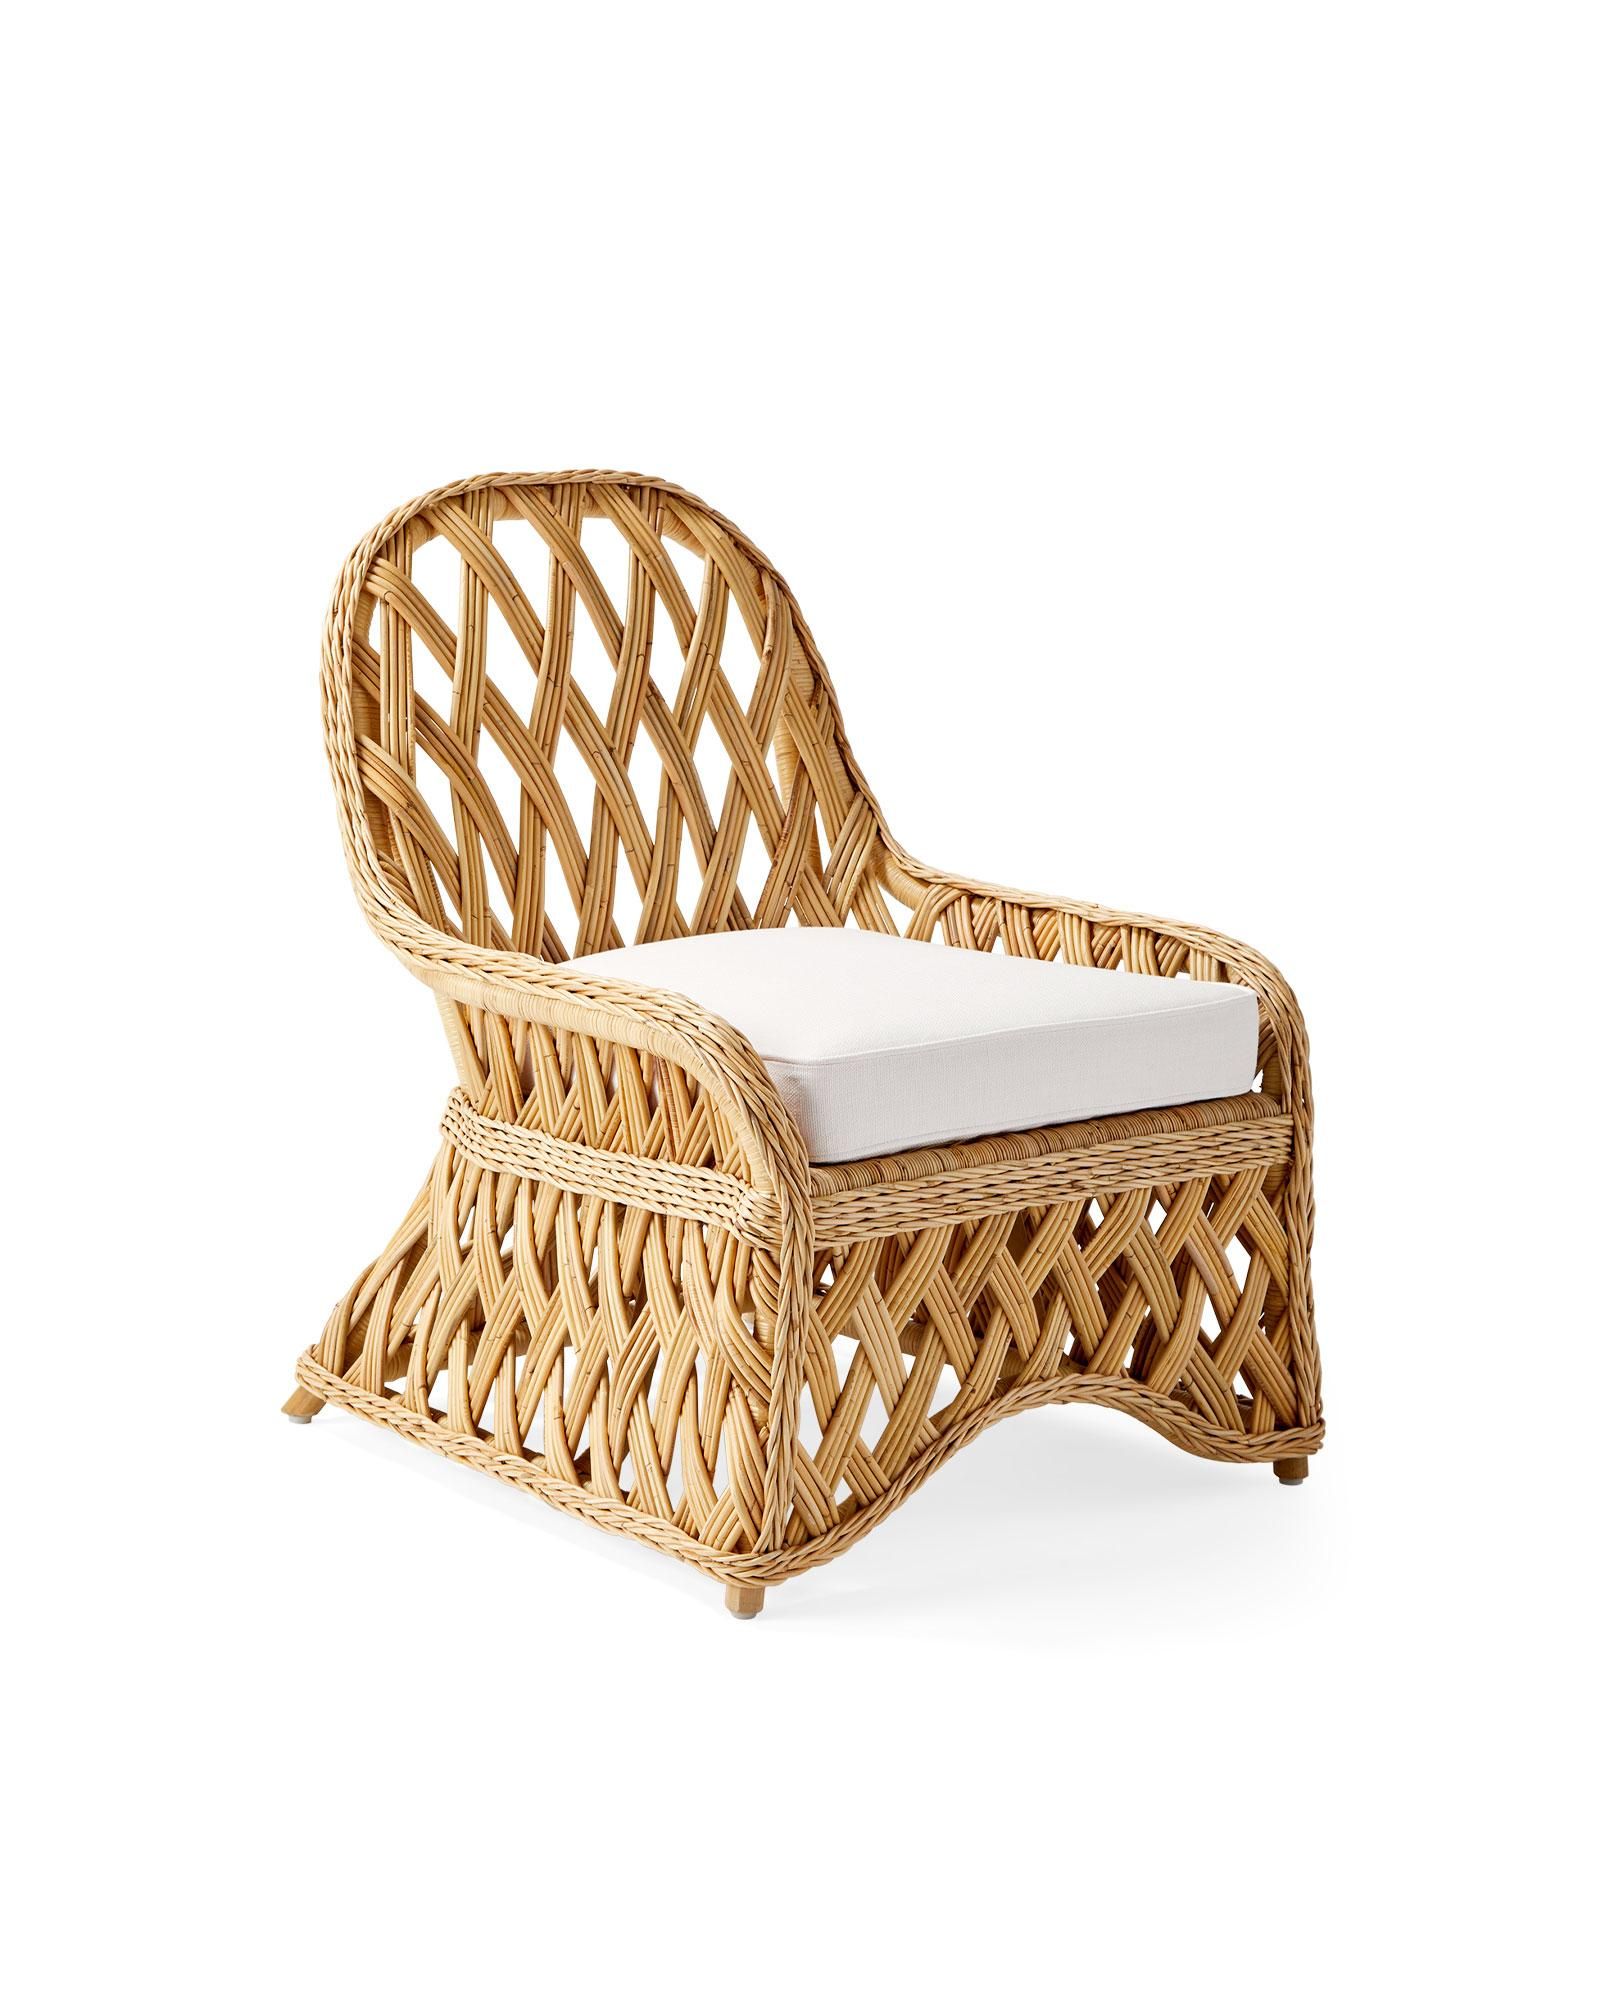 Round Hill Rattan Chair | Serena and Lily